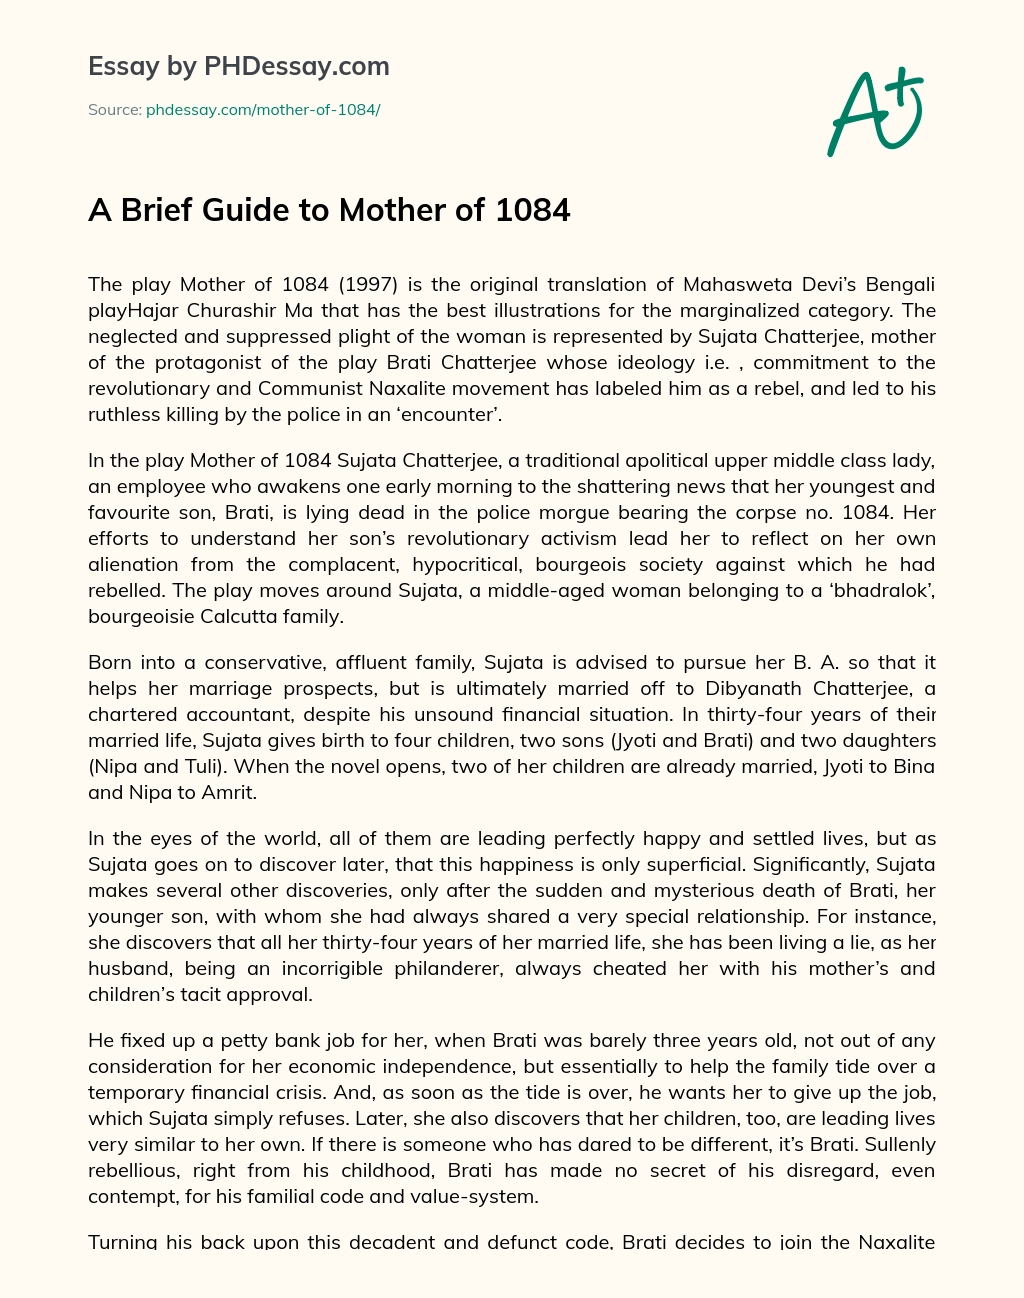 A Brief Guide to Mother of 1084 essay